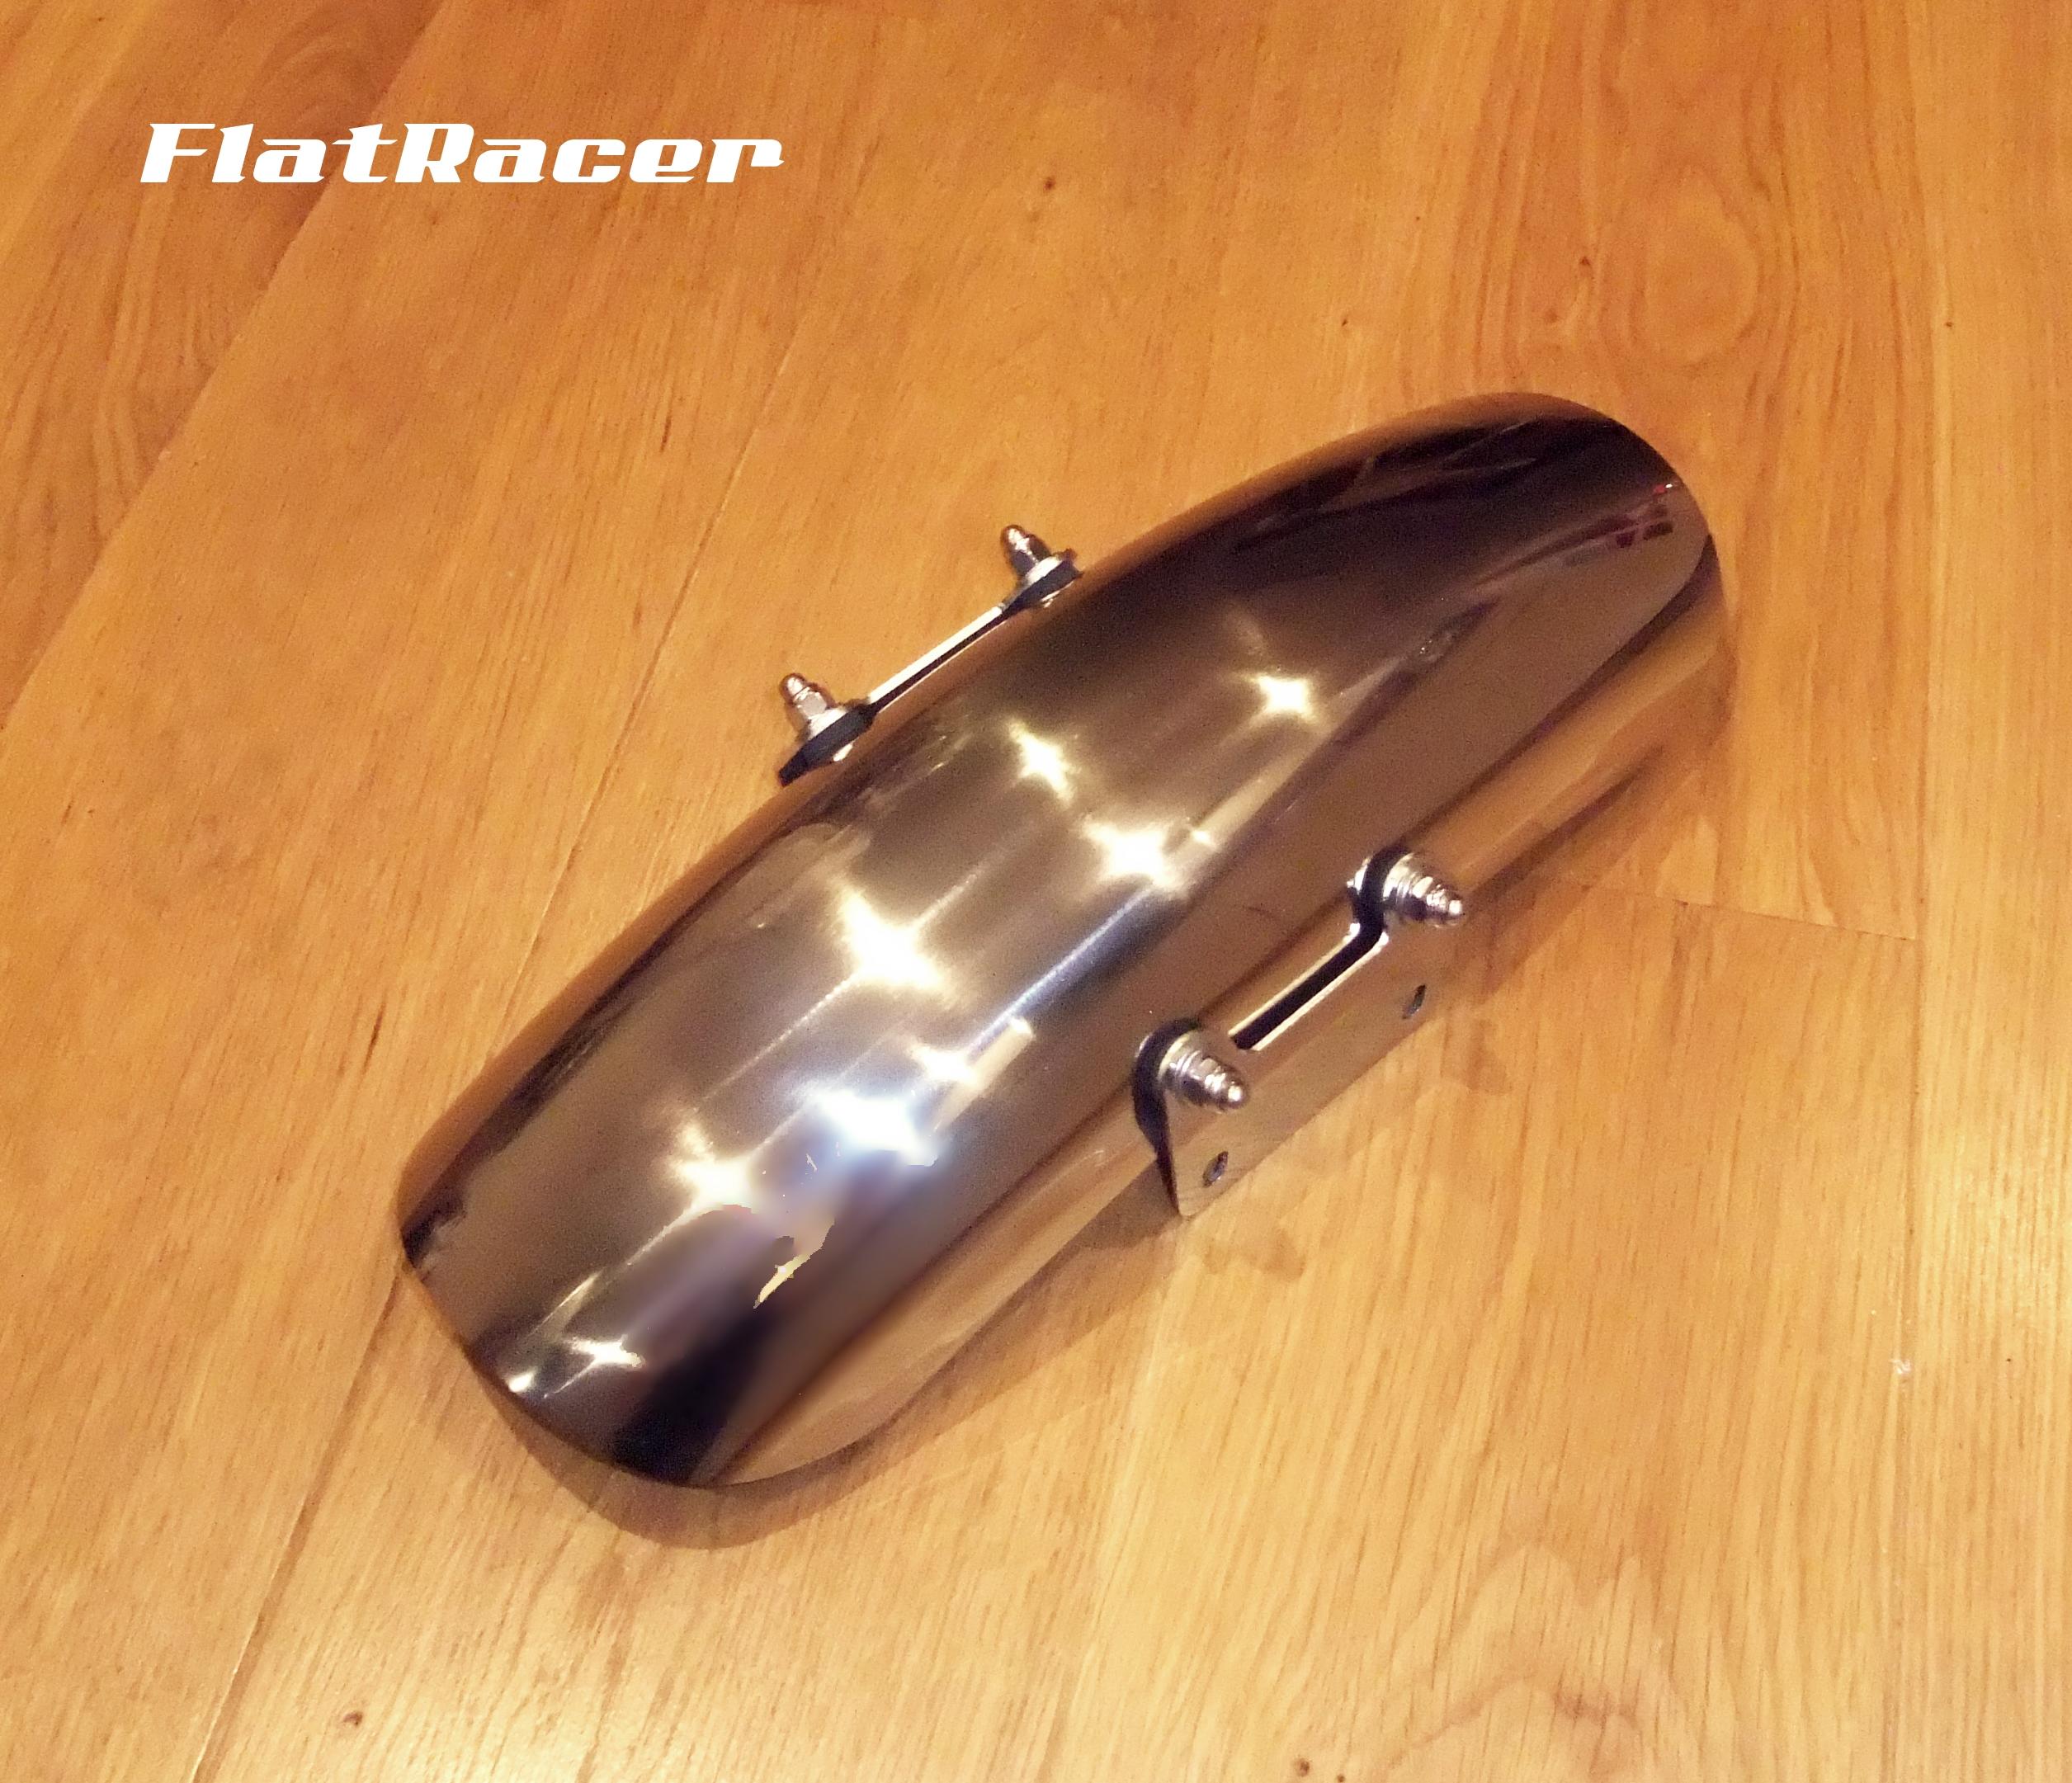 FlatRacer BMW Airhead Boxer Monolever (85 on) stainless steel short front mudguard